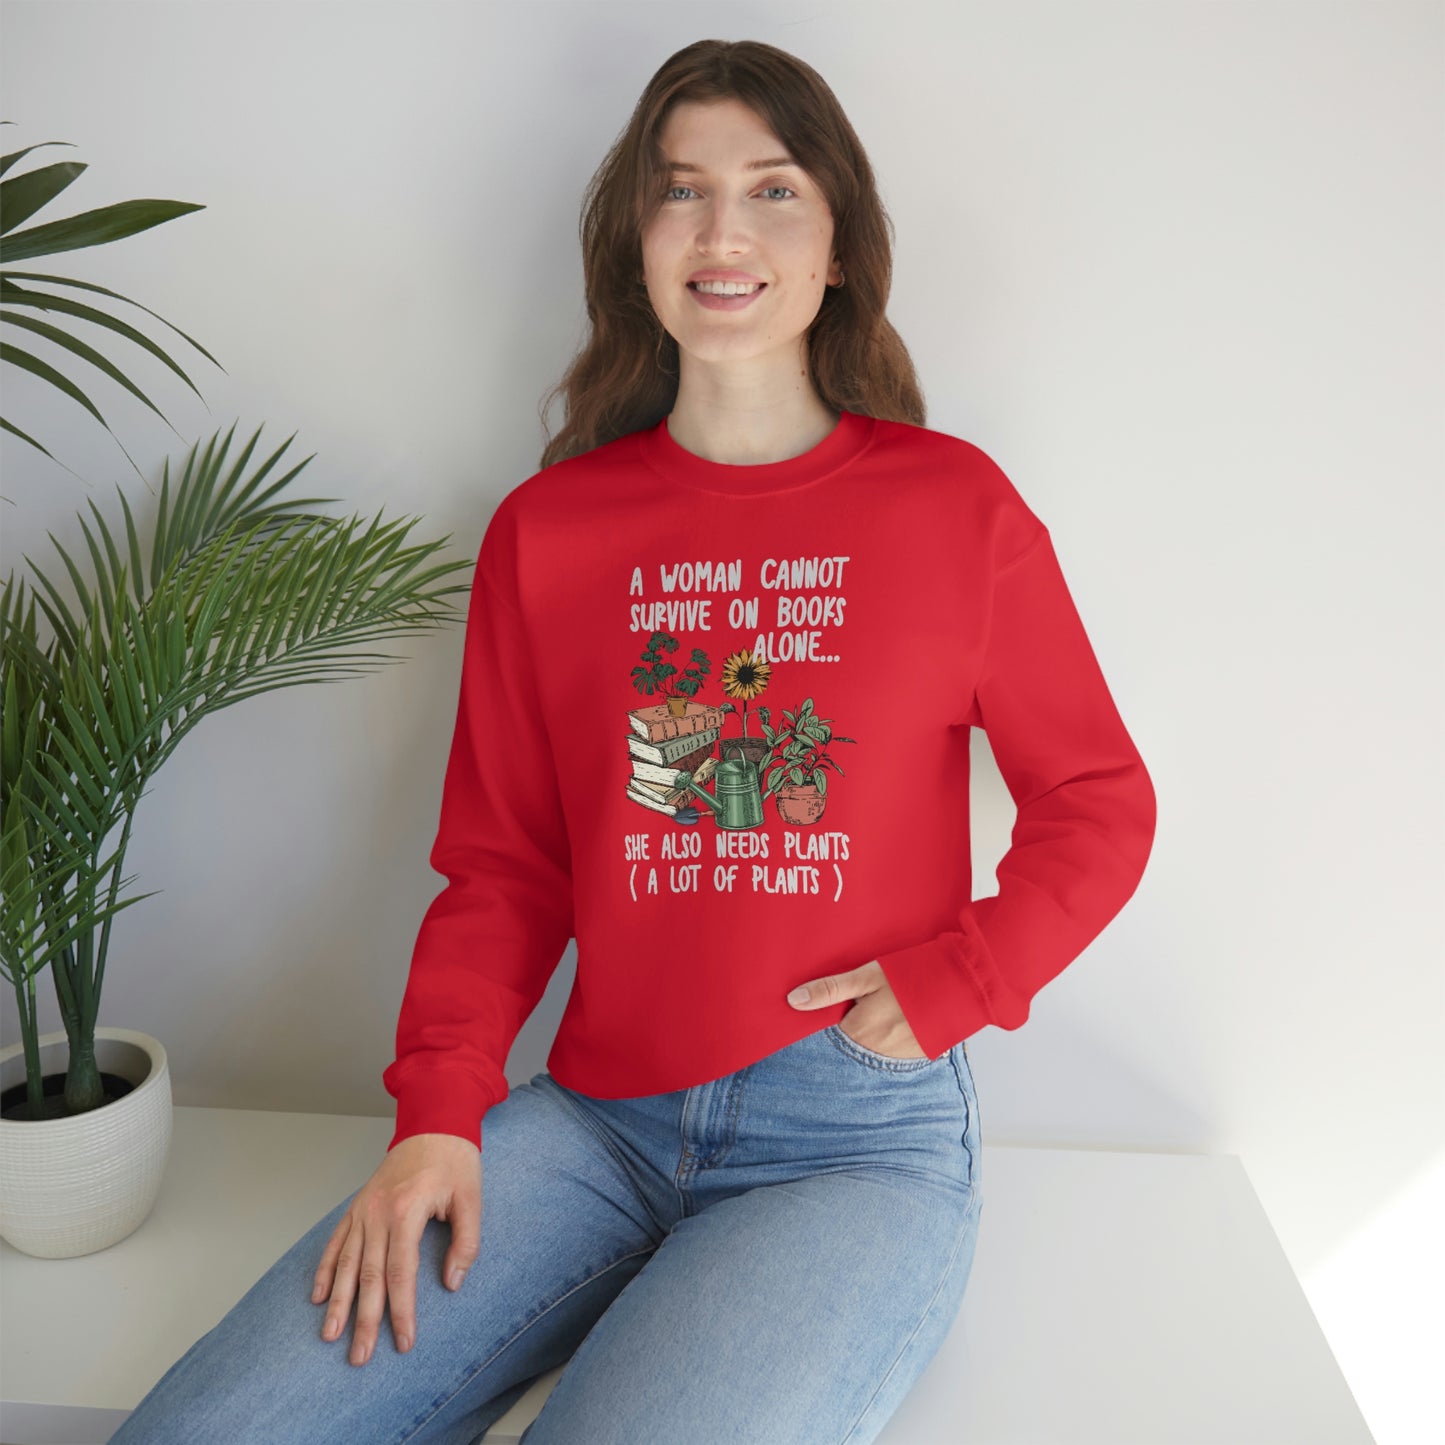 Books and plants Sweatshirt. Christmas gift for Bookworm and plant lady. Proud book lover and plant lover sweater